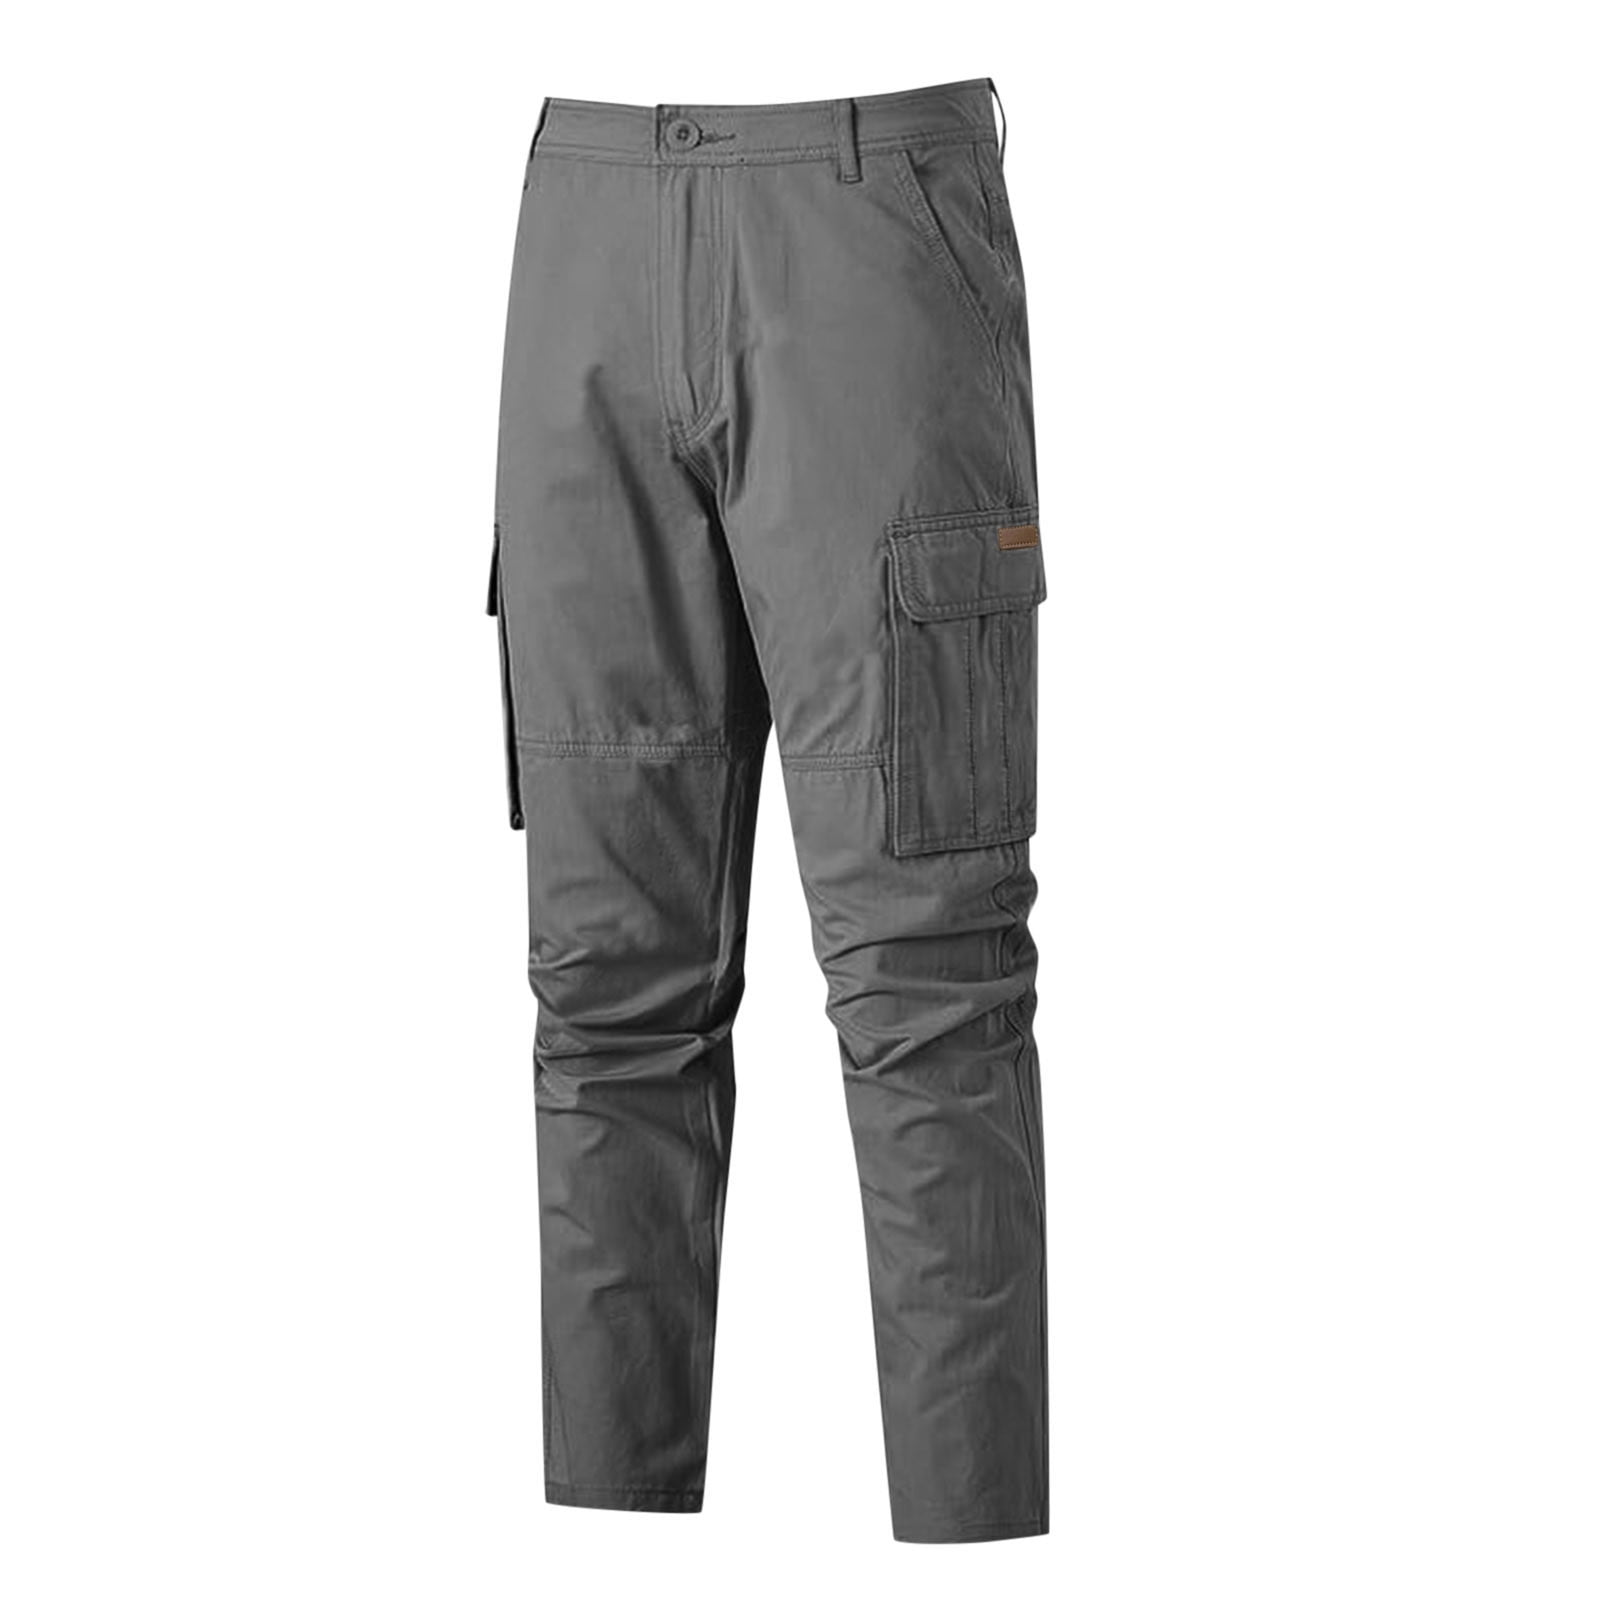 Men's Slim-Fit Cargo Pant Elastic Waist Relaxed Fit Hiking Outdoor Work ...